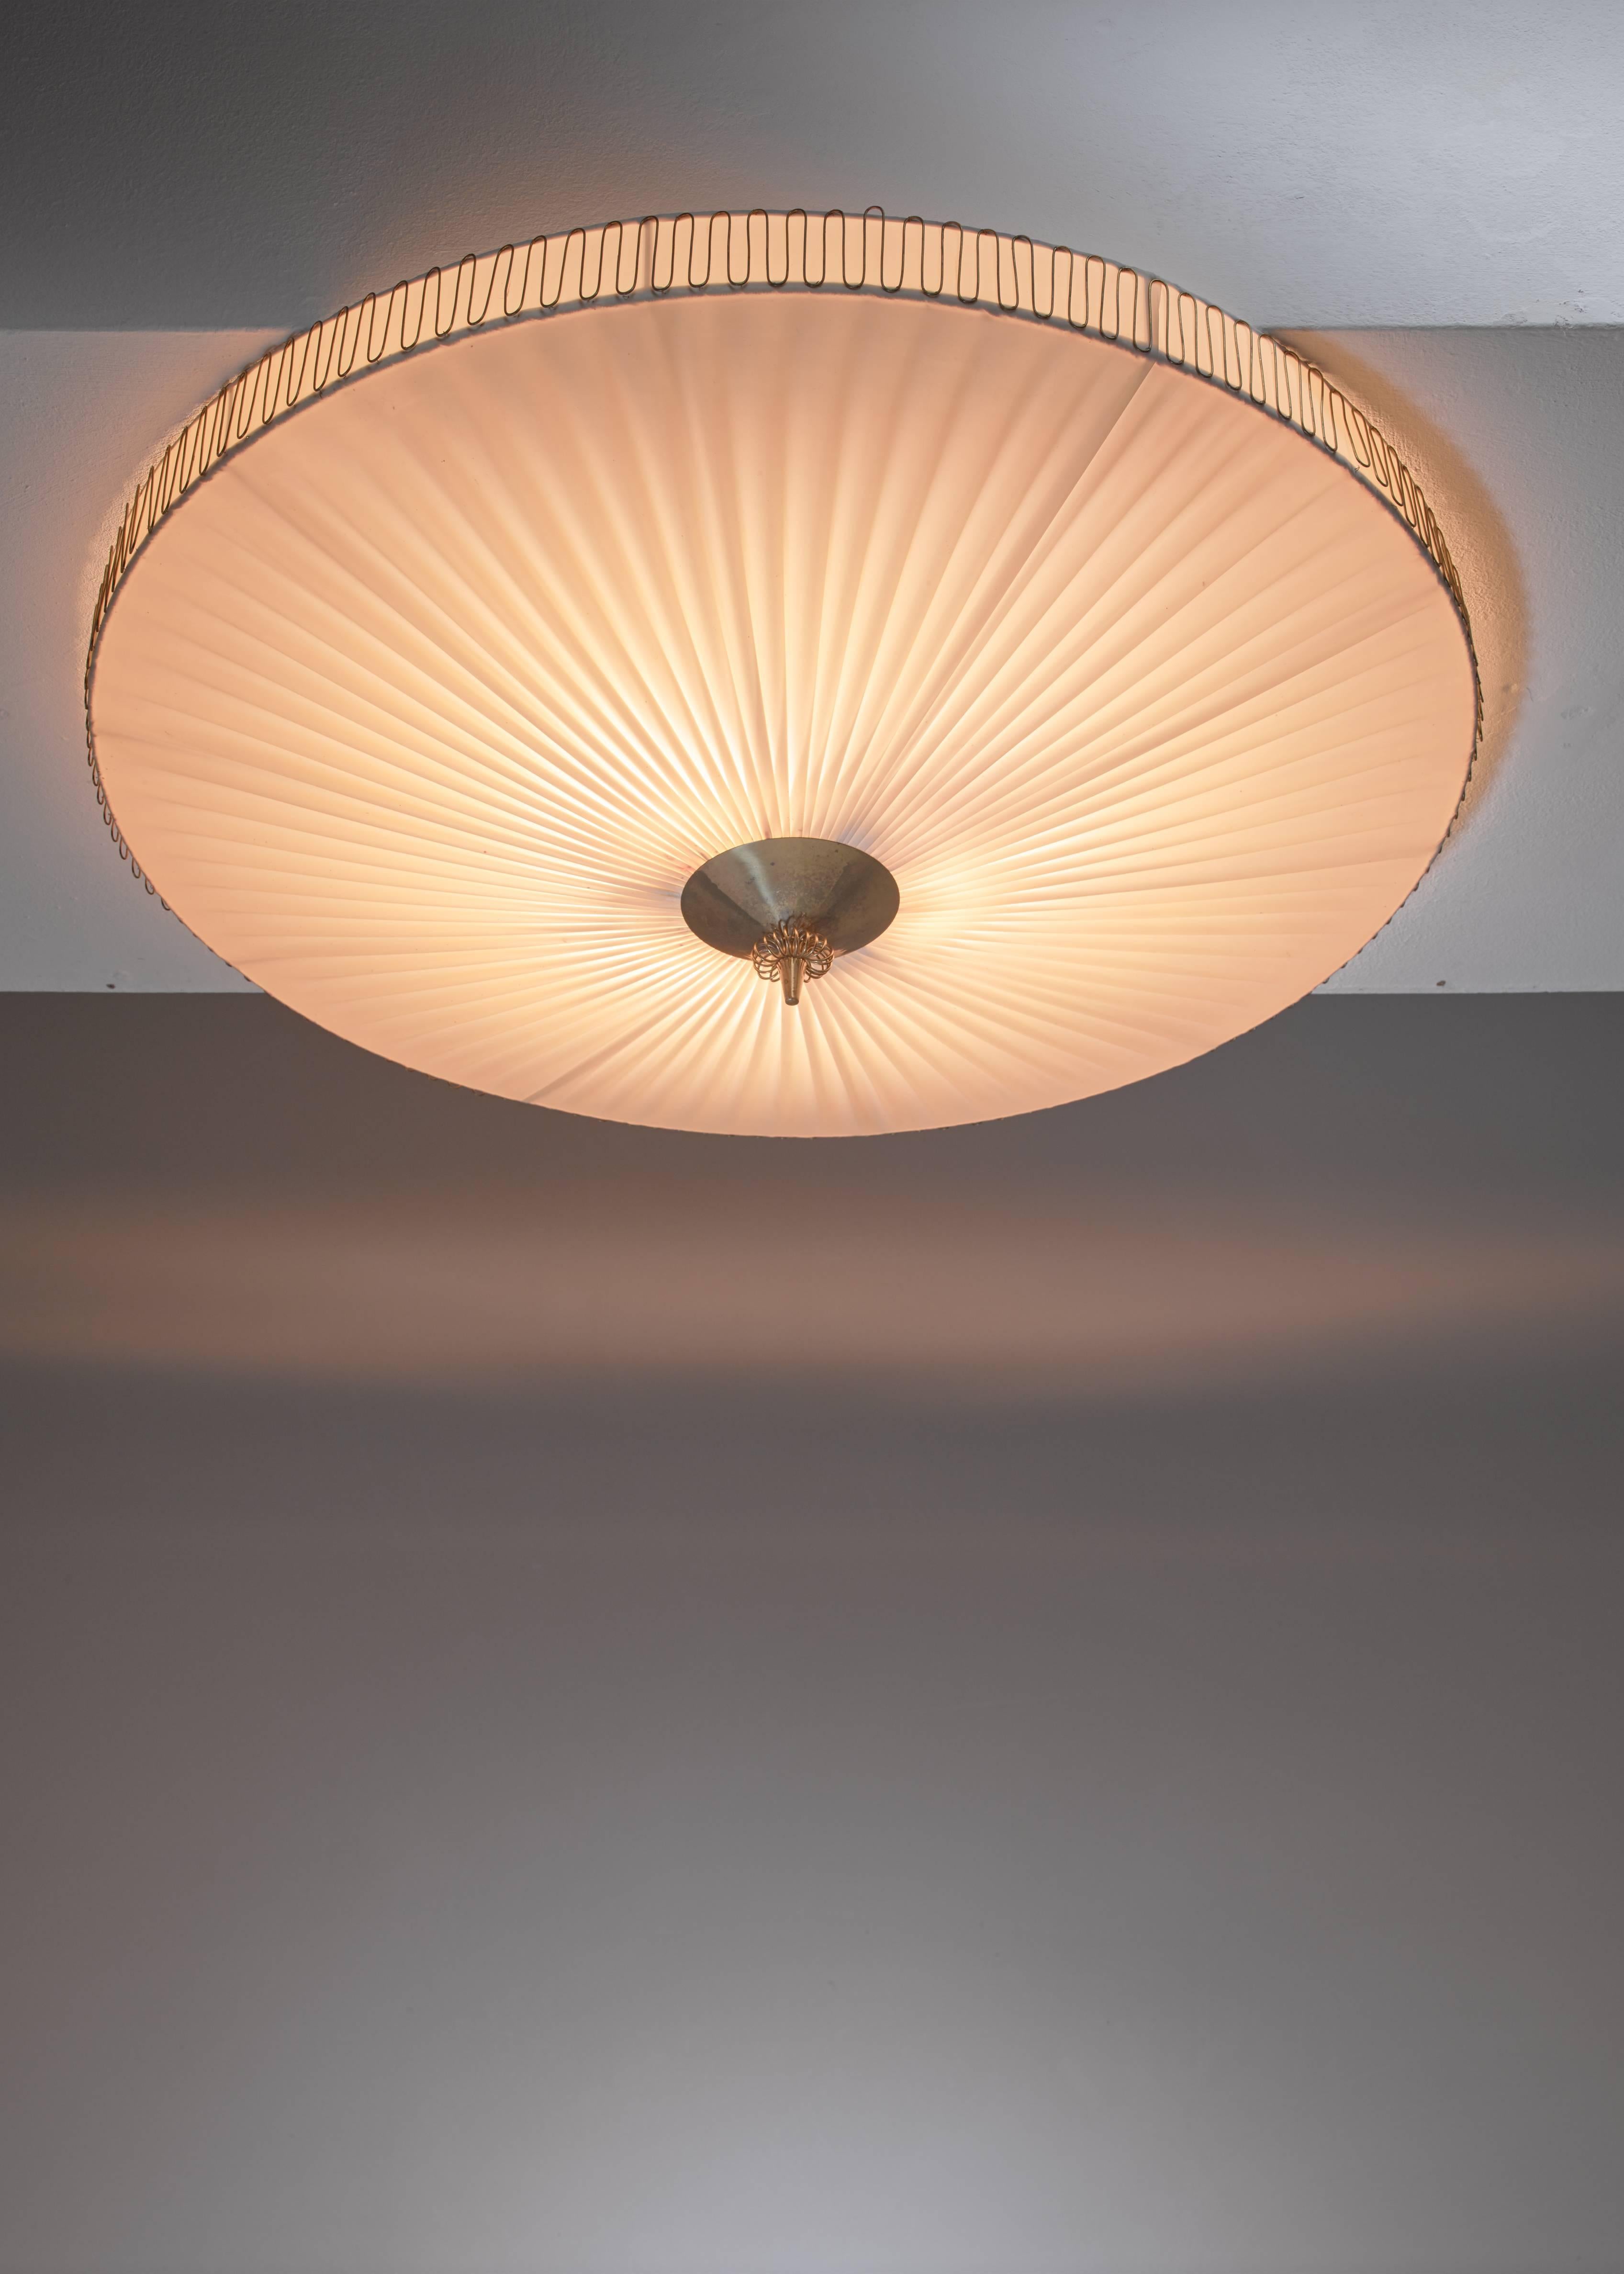 A large (75 cm diameter) round pleated flush mount ceiling lamp with a brass centre by Idman. The lamp has three light bulbs inside and is marked.

*This piece is curated for you by Bloomberry *